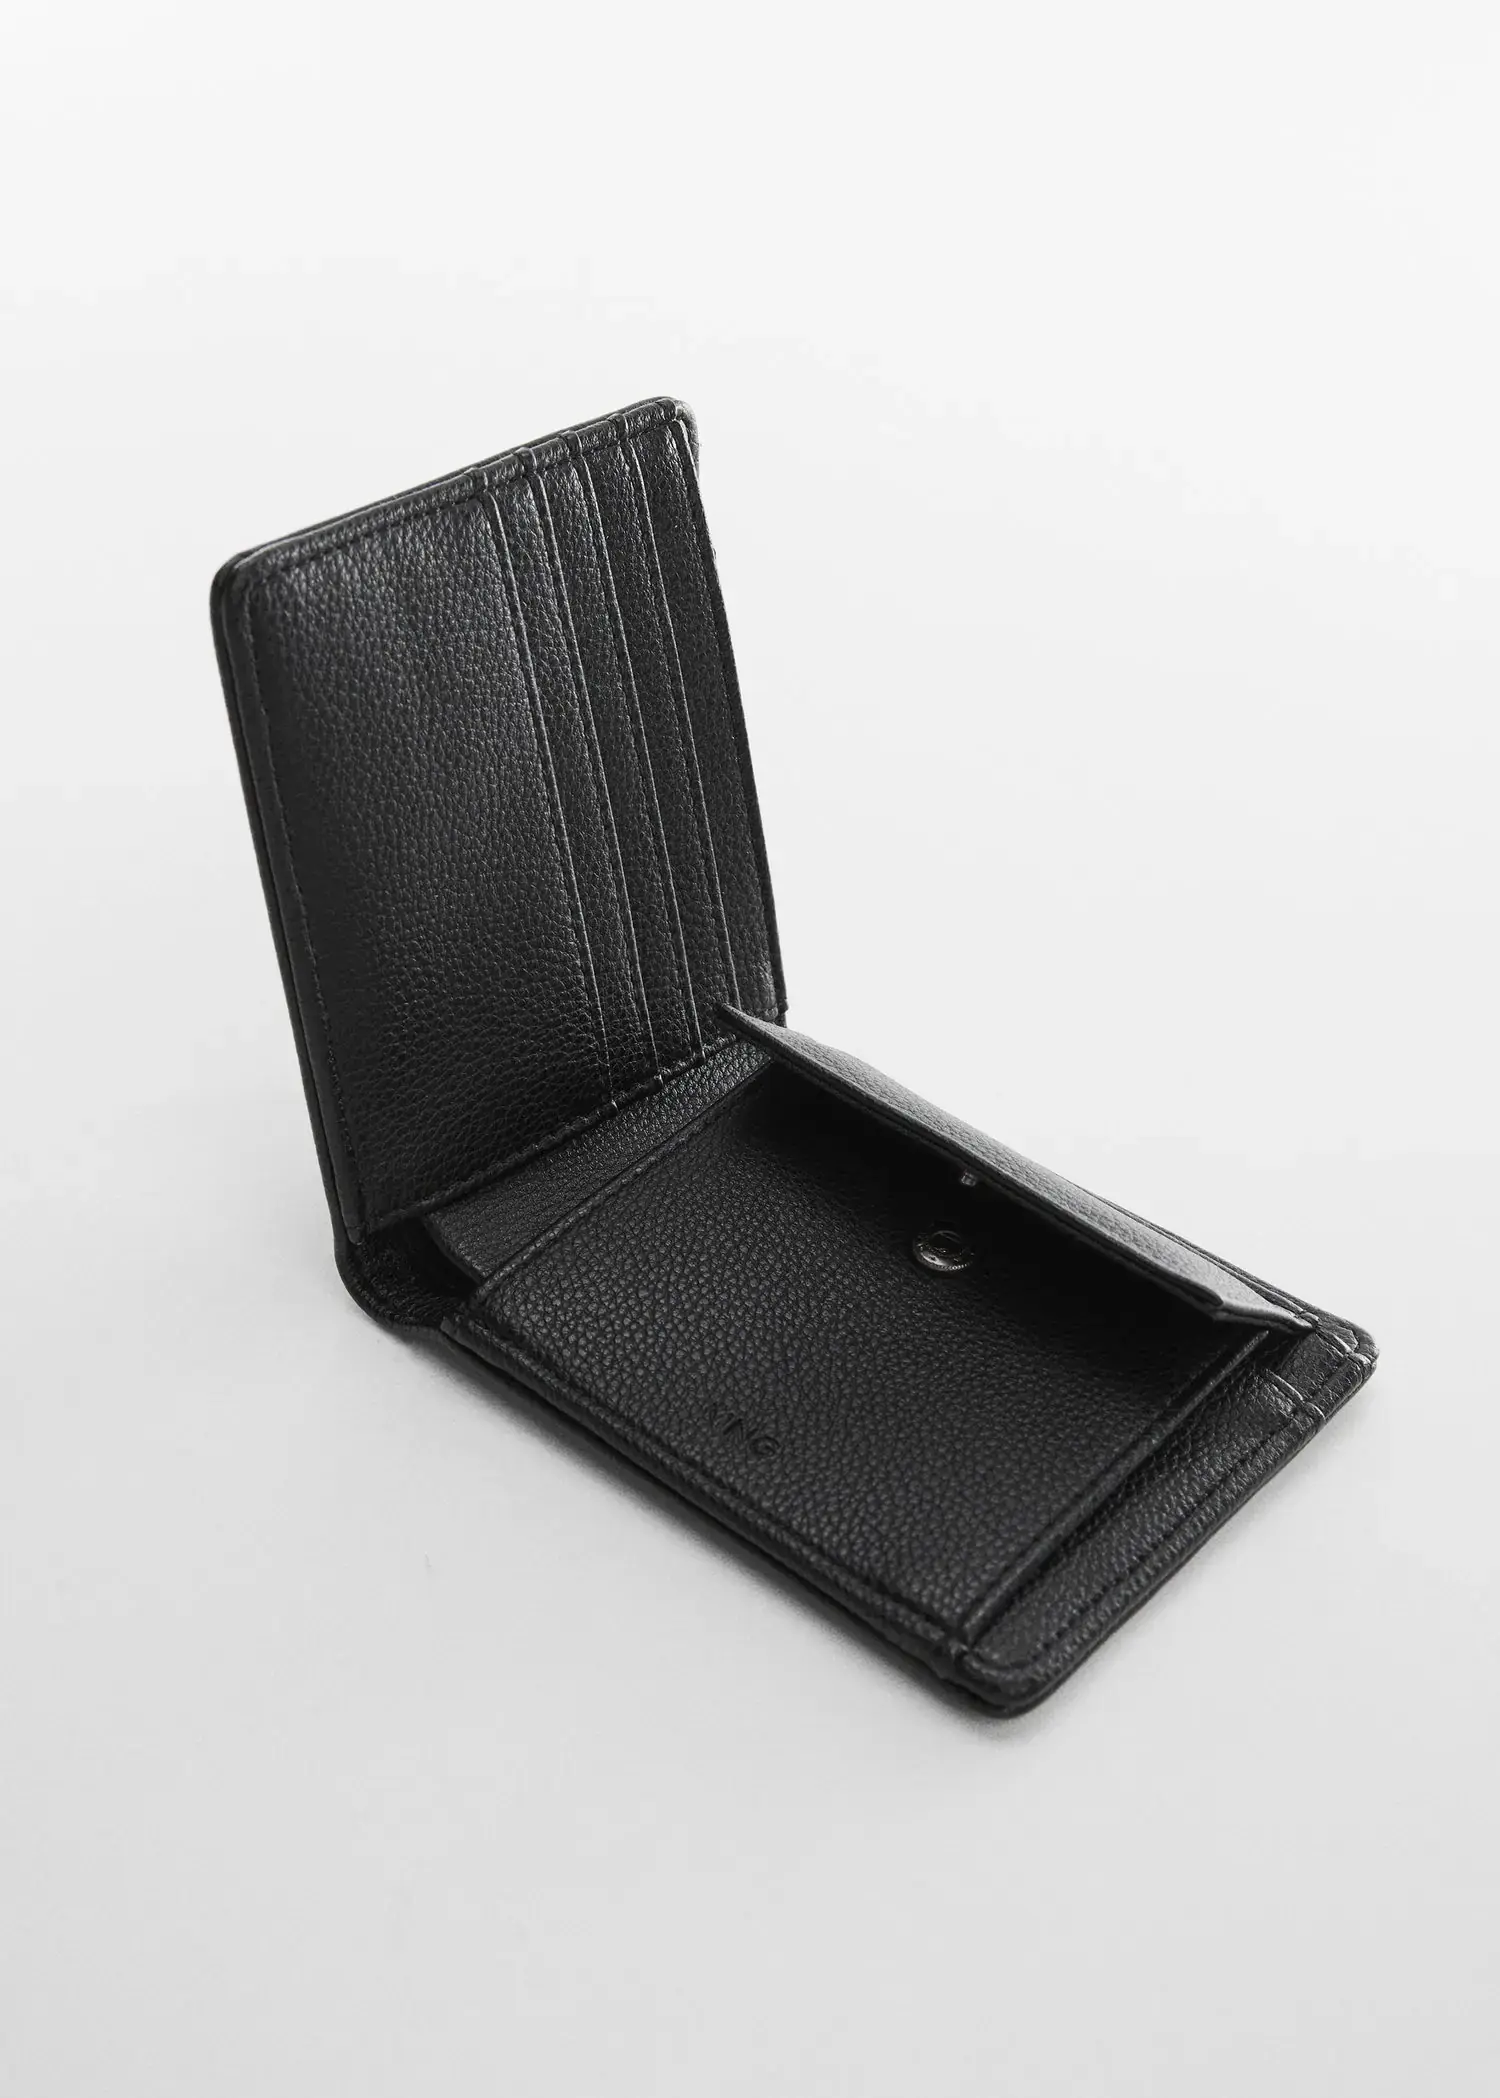 Mango Anti-contactless wallet. an open black wallet sitting on top of a white table. 